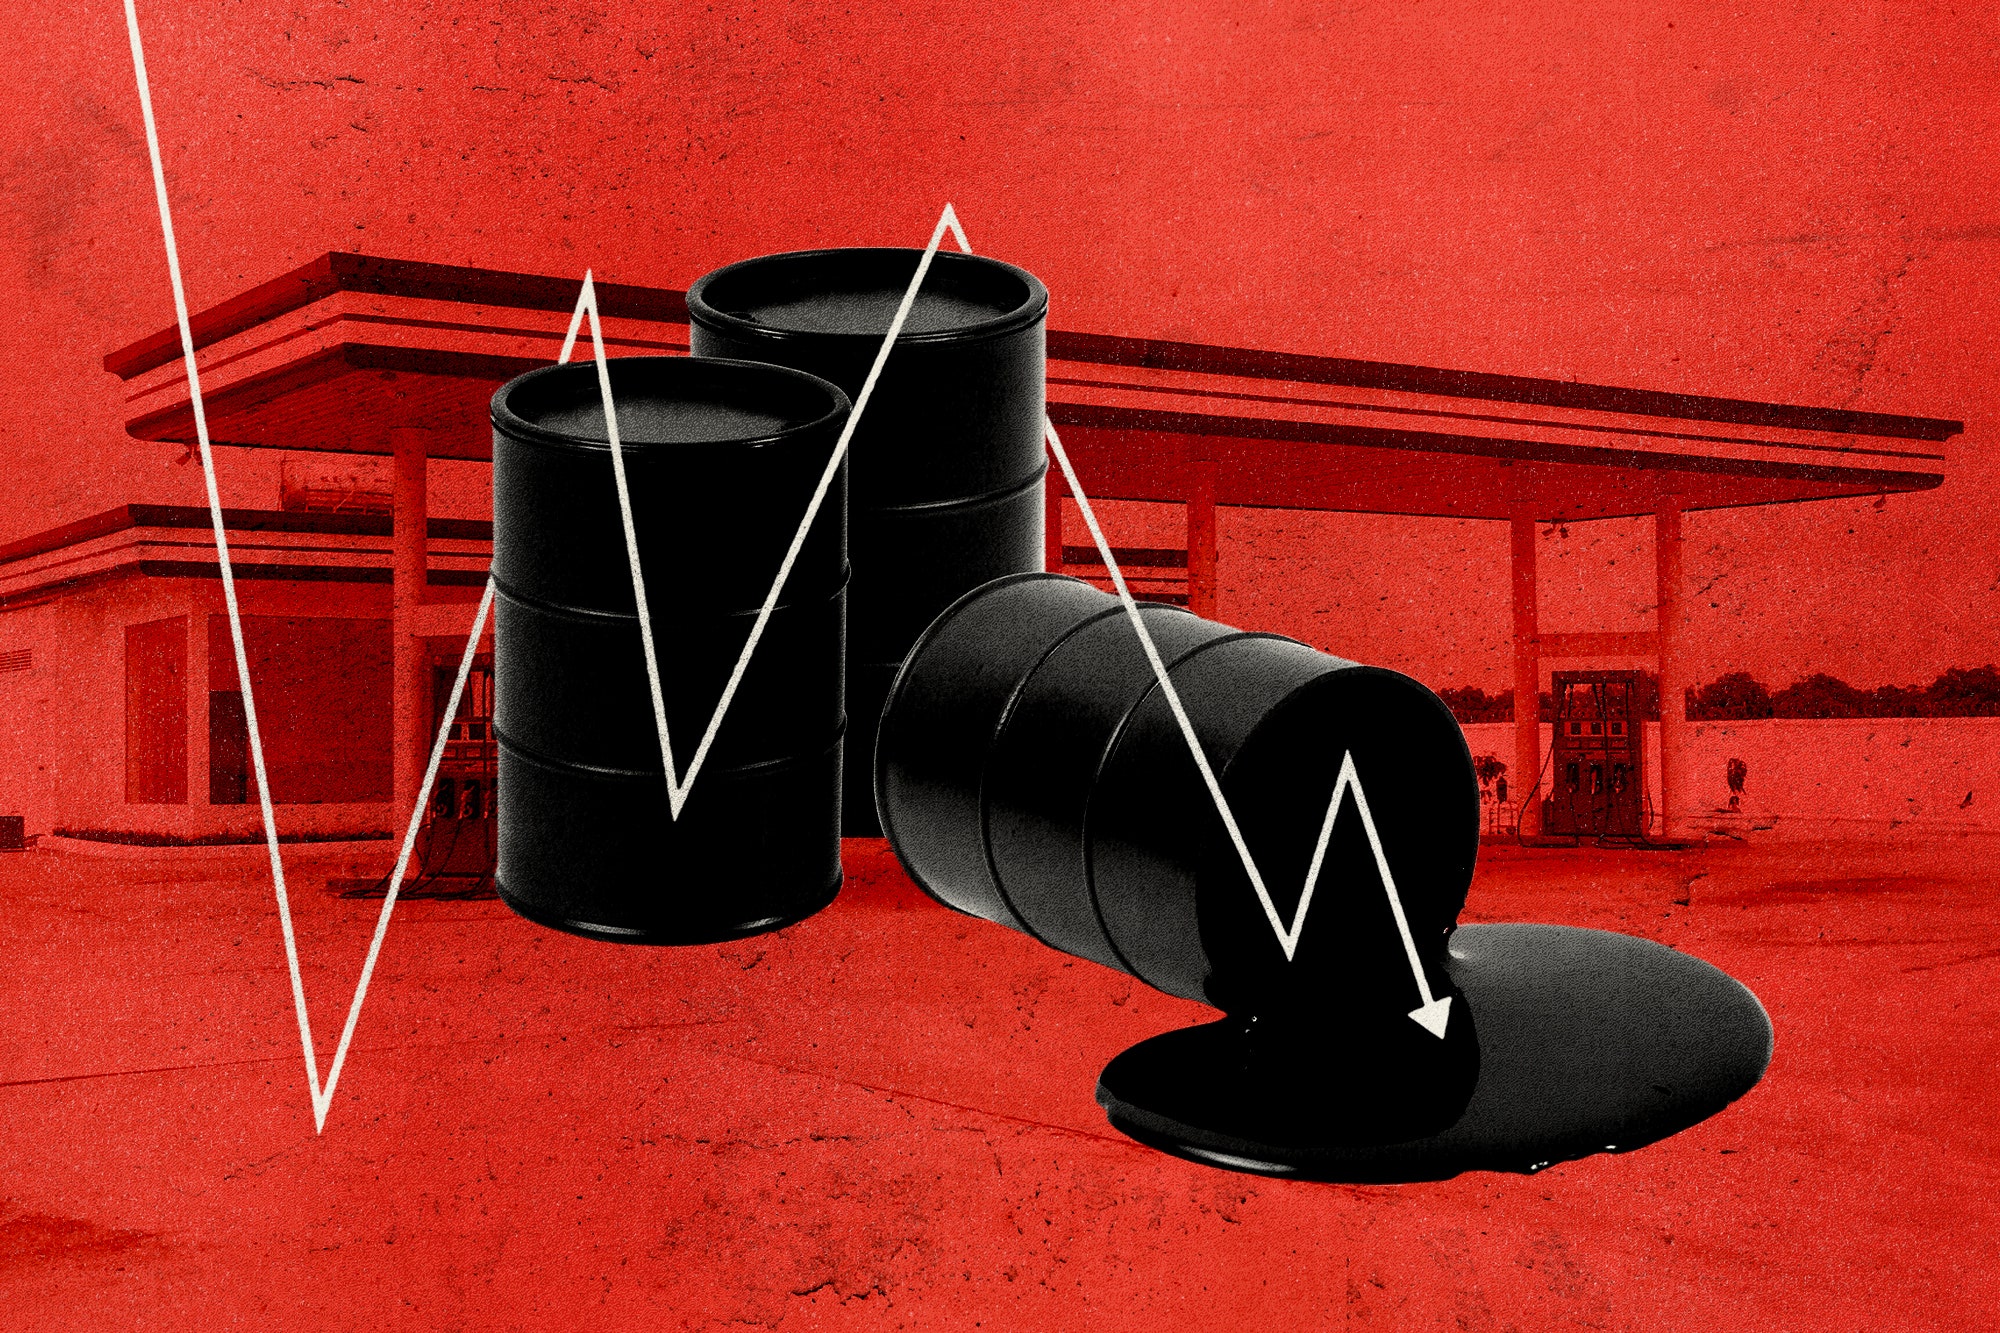 Oil Traders on the Day Prices Went Negative | Vanity Fair